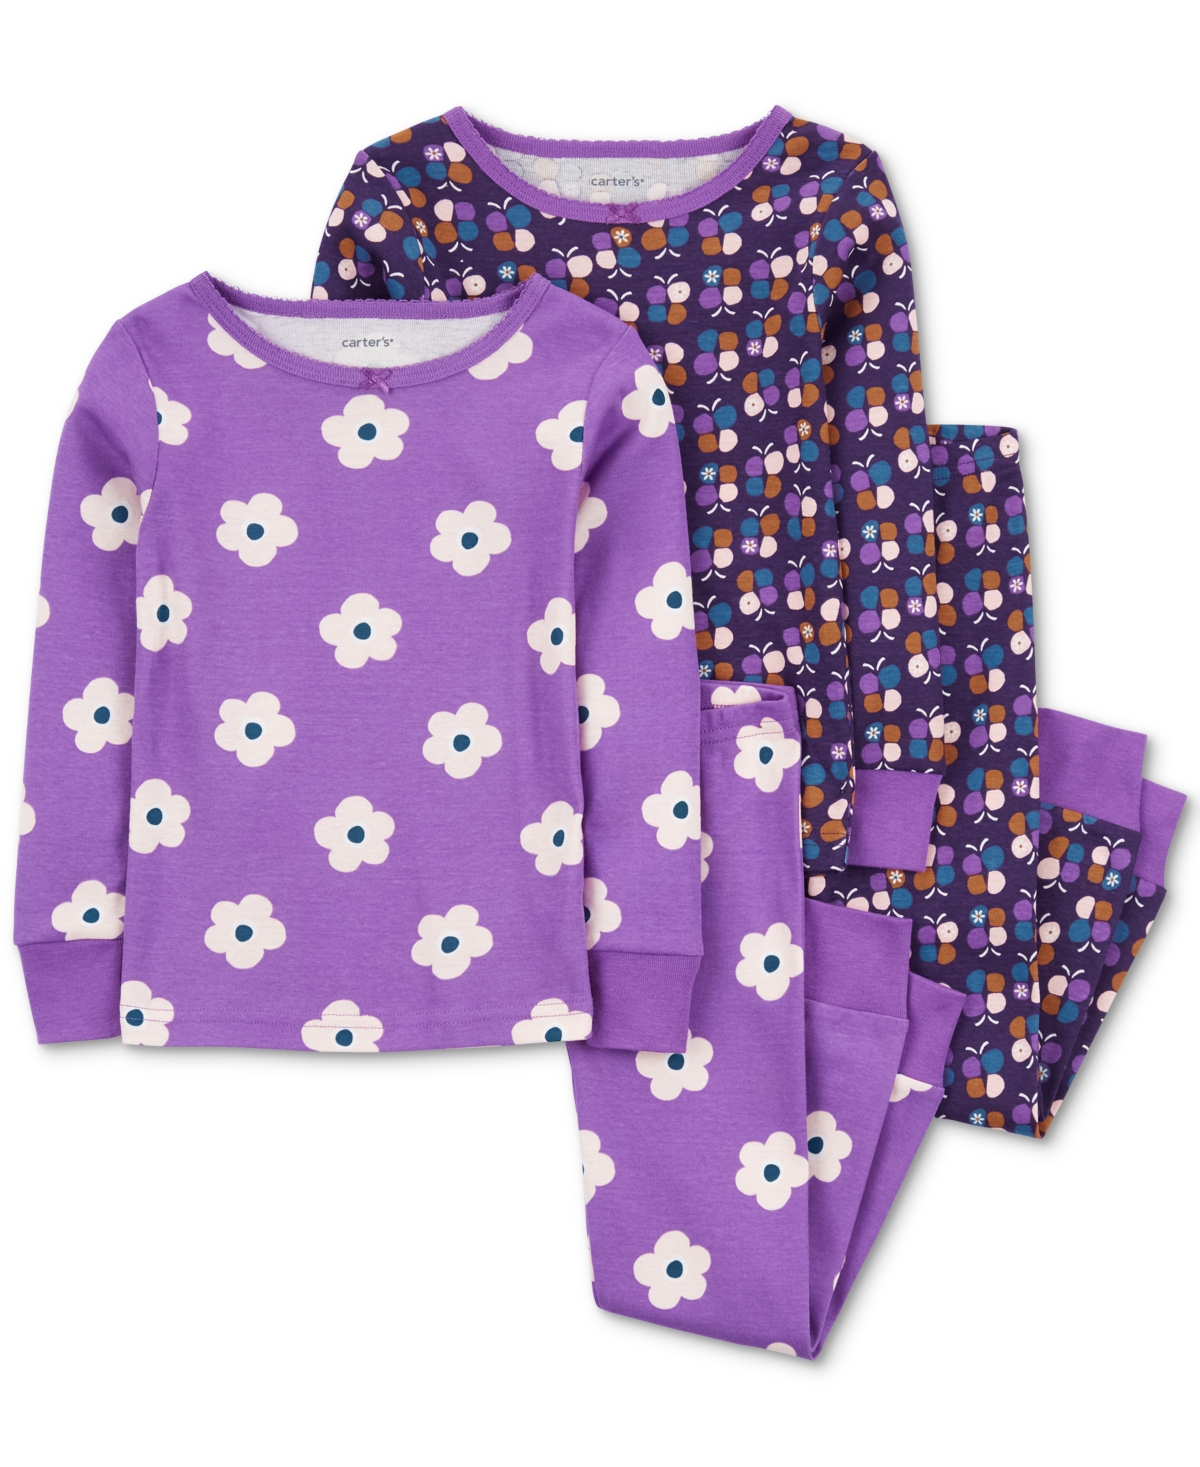 Carter's Babies' Toddler Girls Flowers And Butterflies 100% Snug-fit Cotton Pajamas, 4 Piece Set In Purple